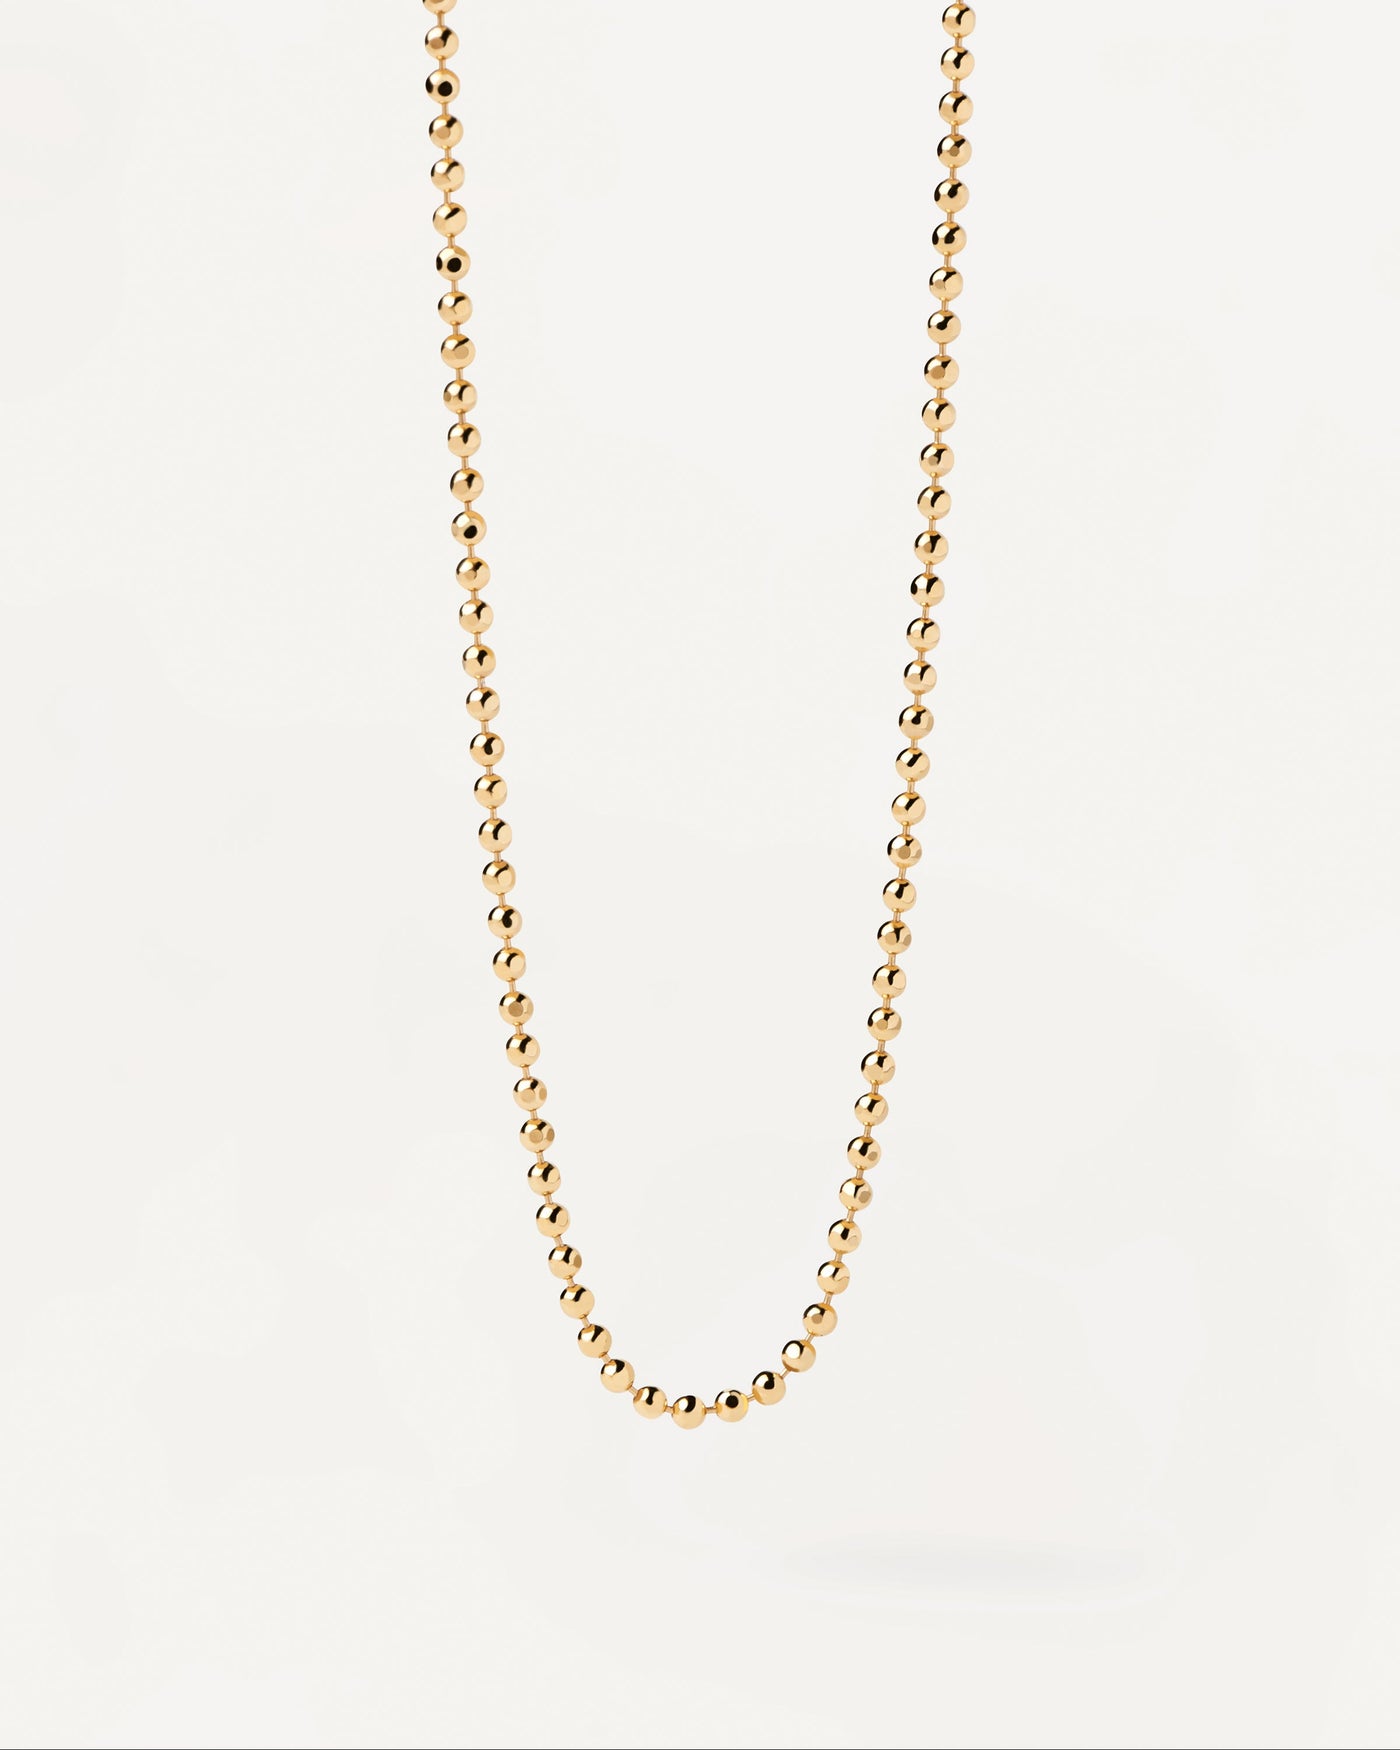 New Arrival: Micro Gold Plated ball Necklace for women's